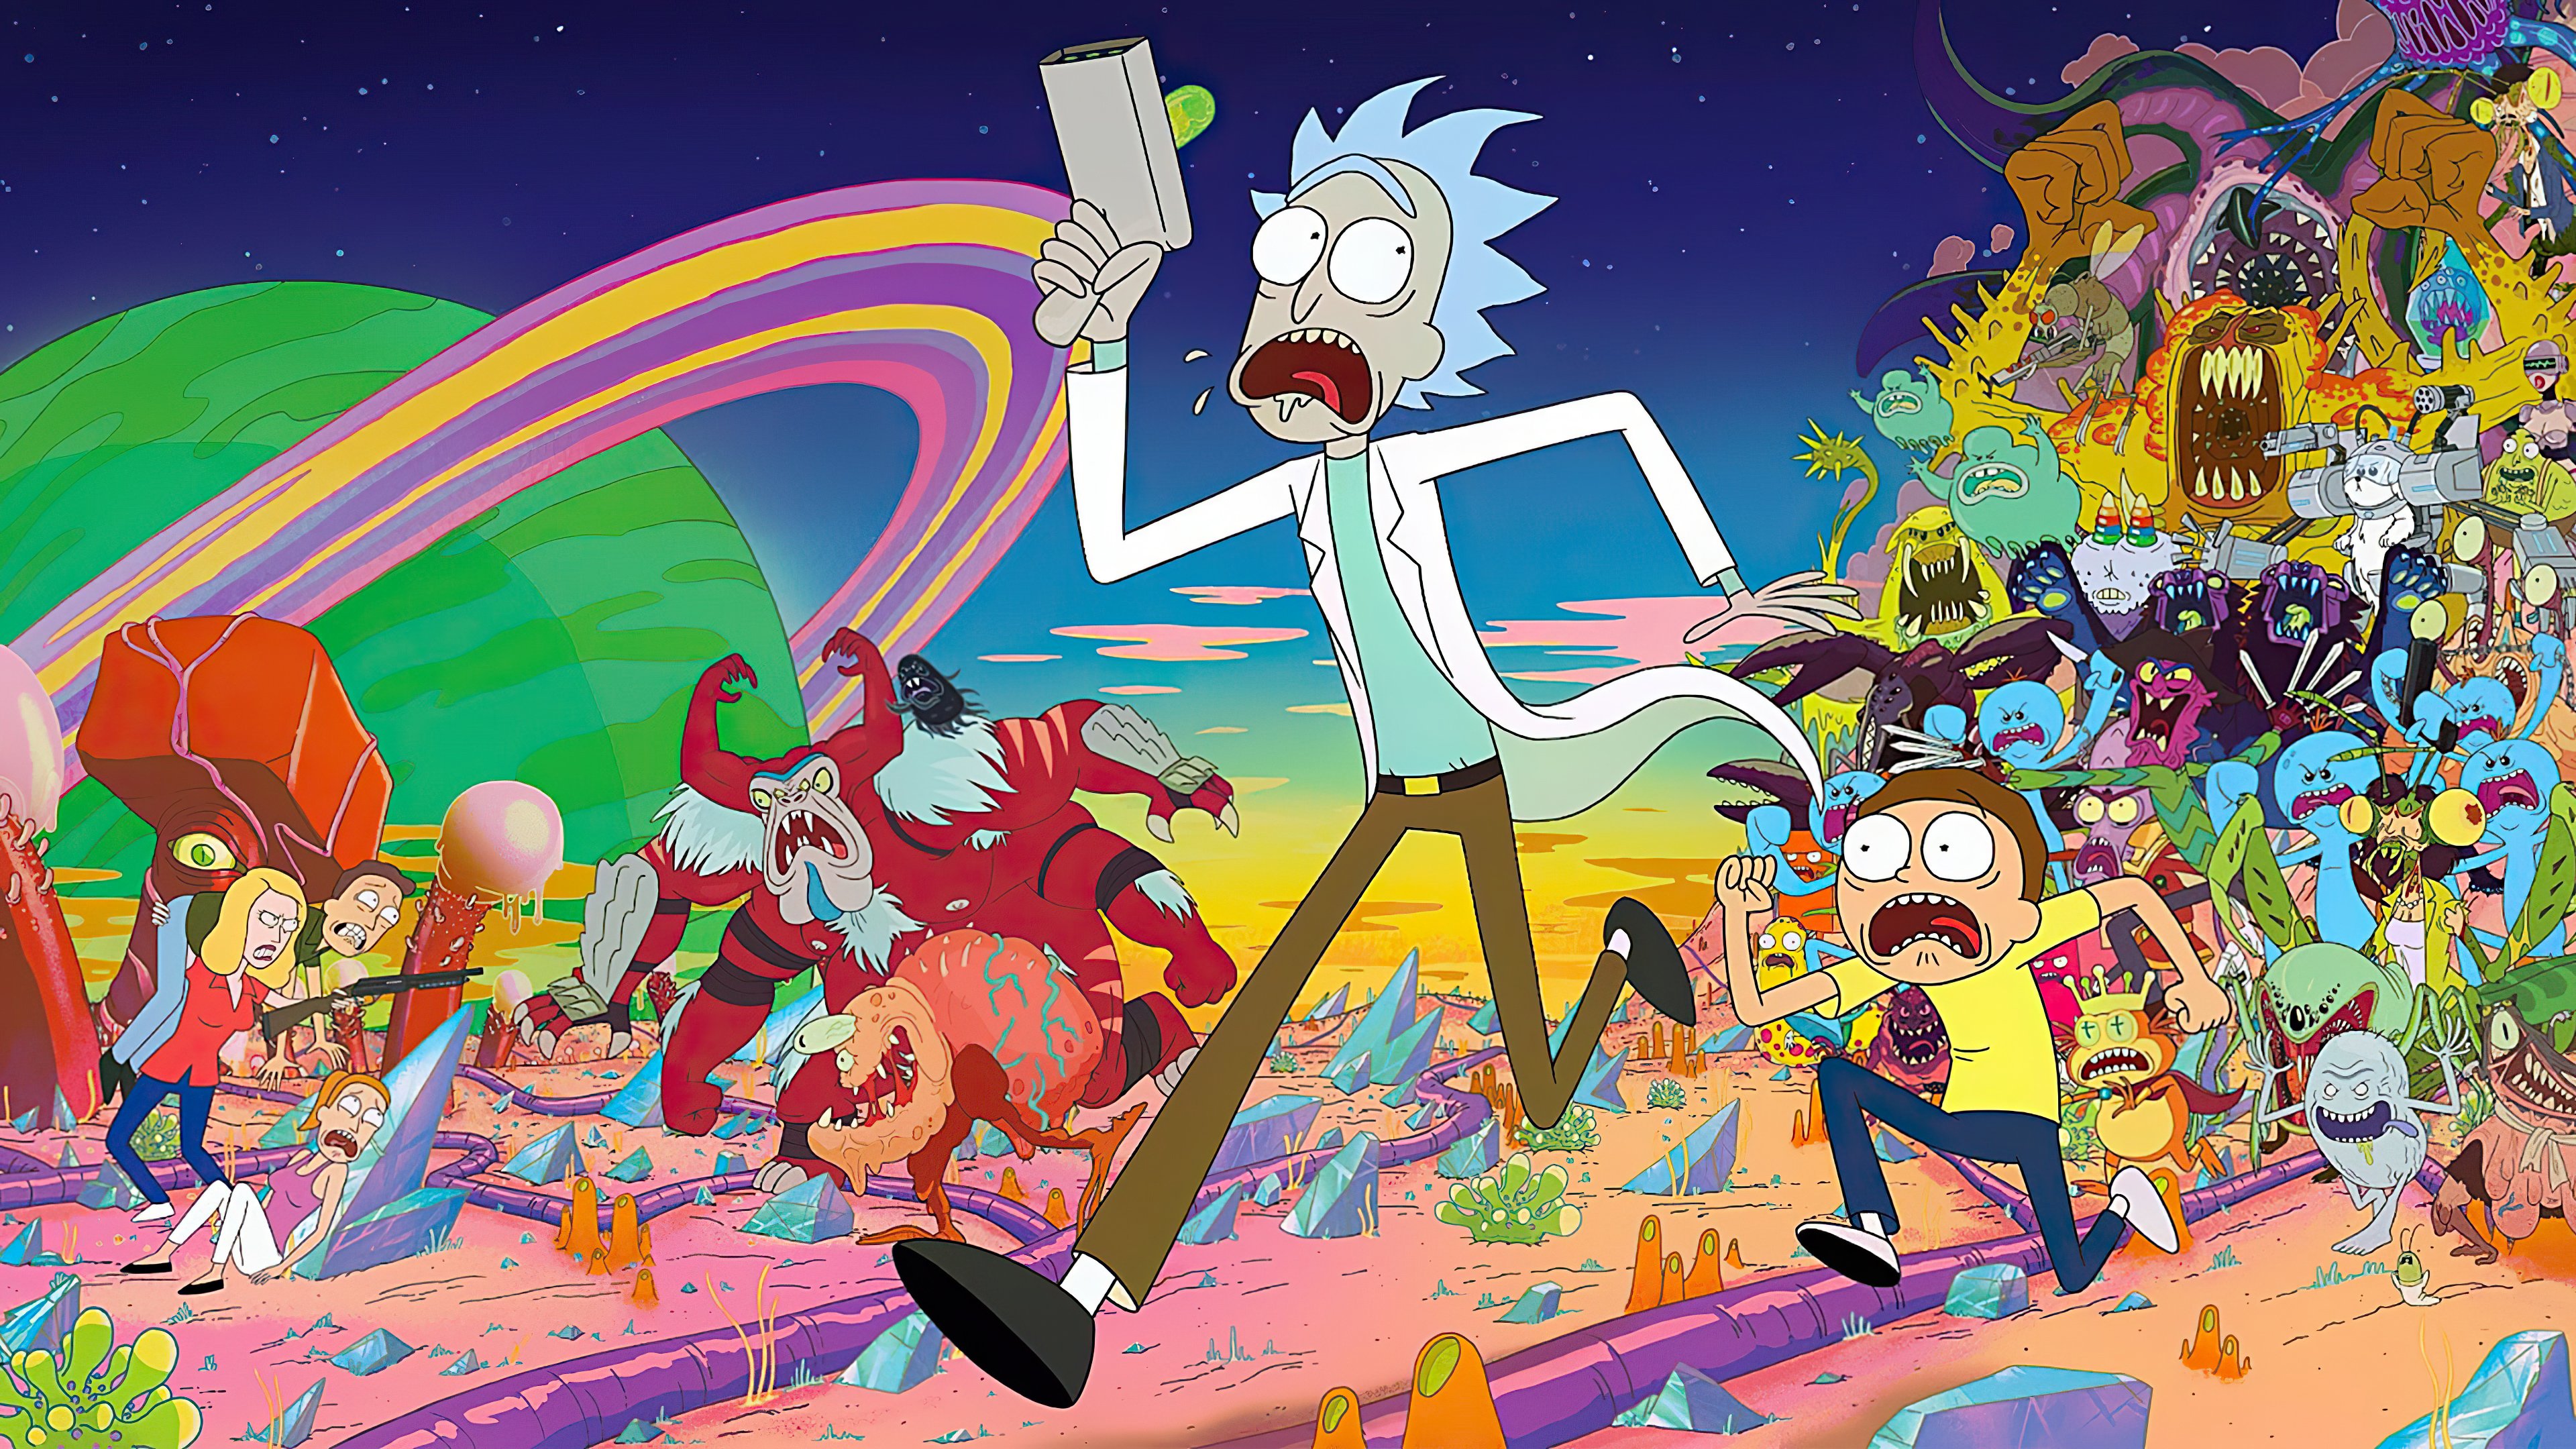 Wallpaper All Rick and Morty's characters